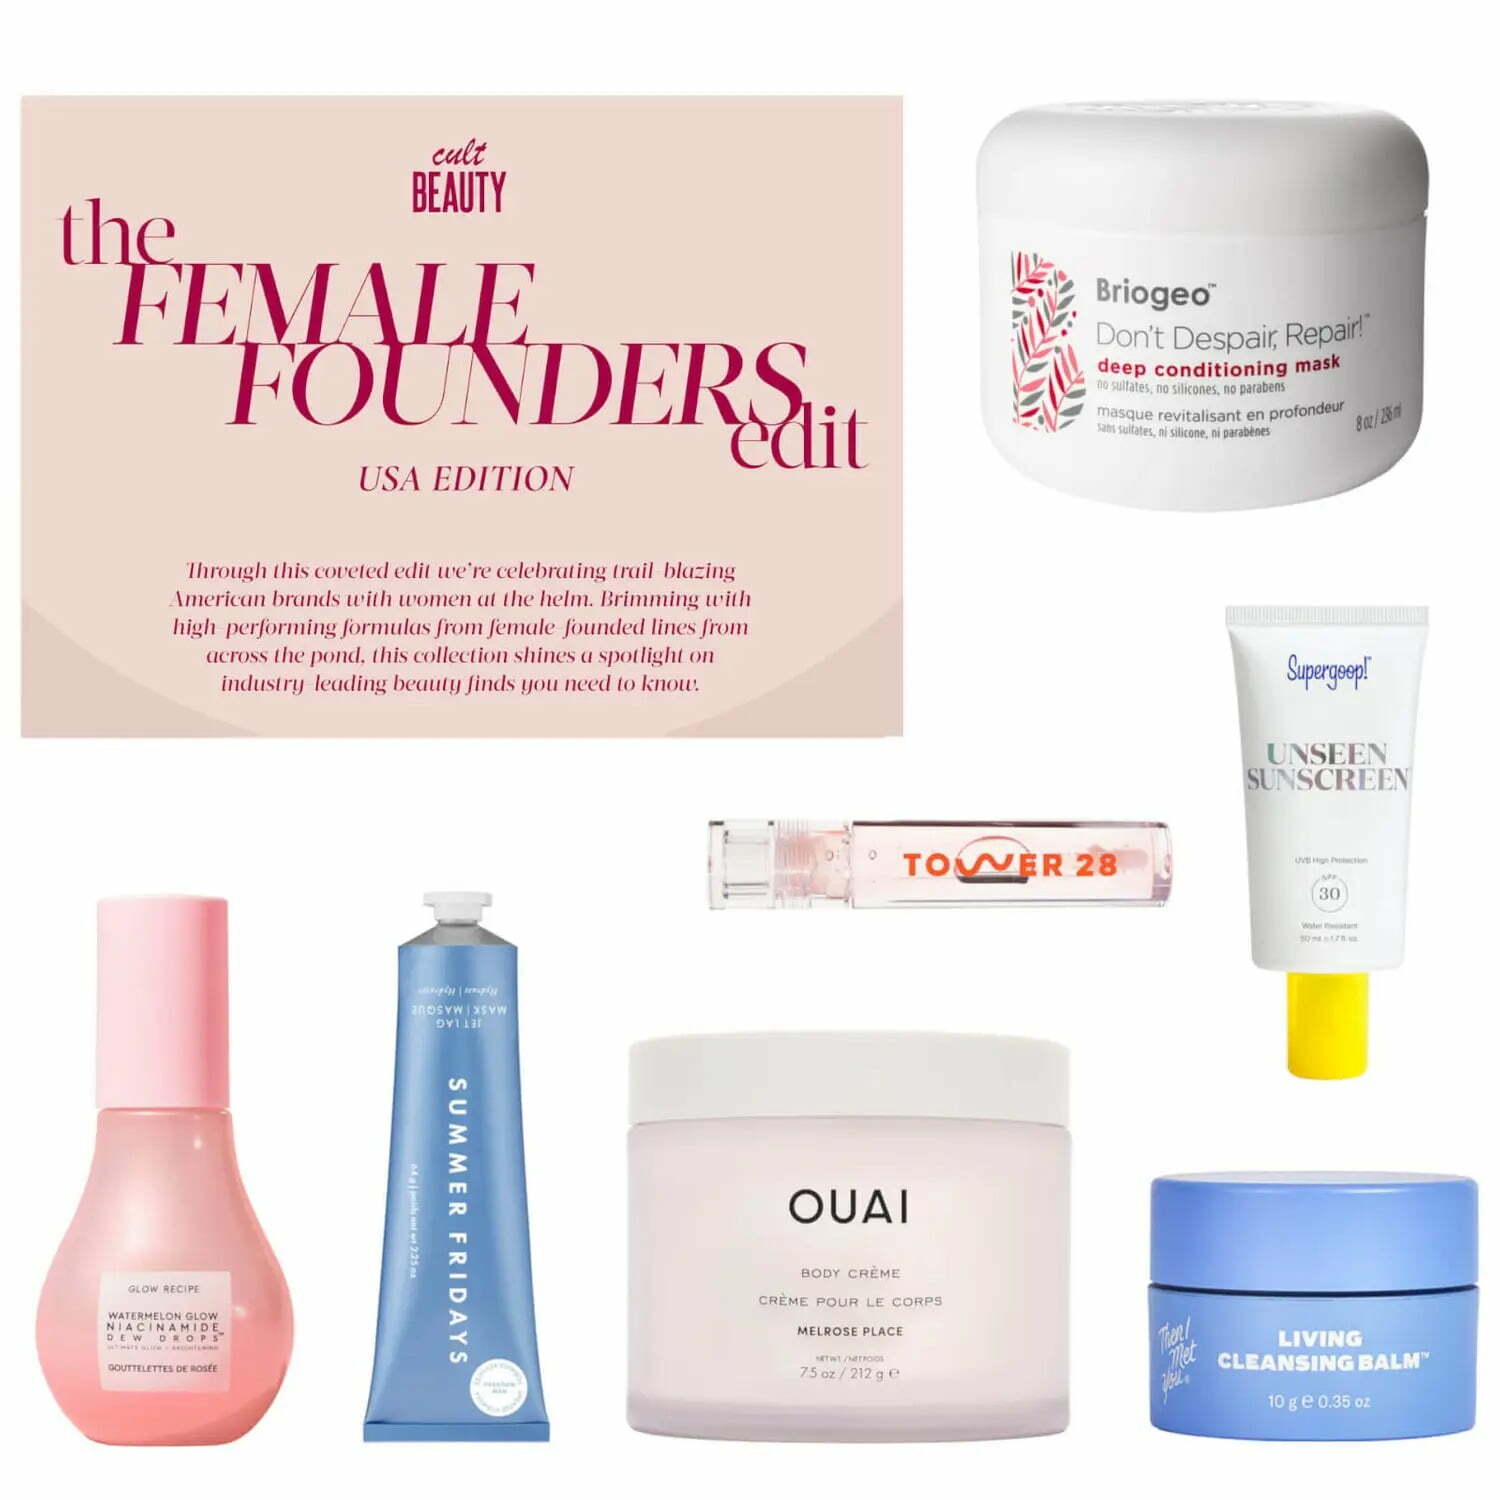 17% off the Cult Beauty The Female Founders Edit: USA Edition